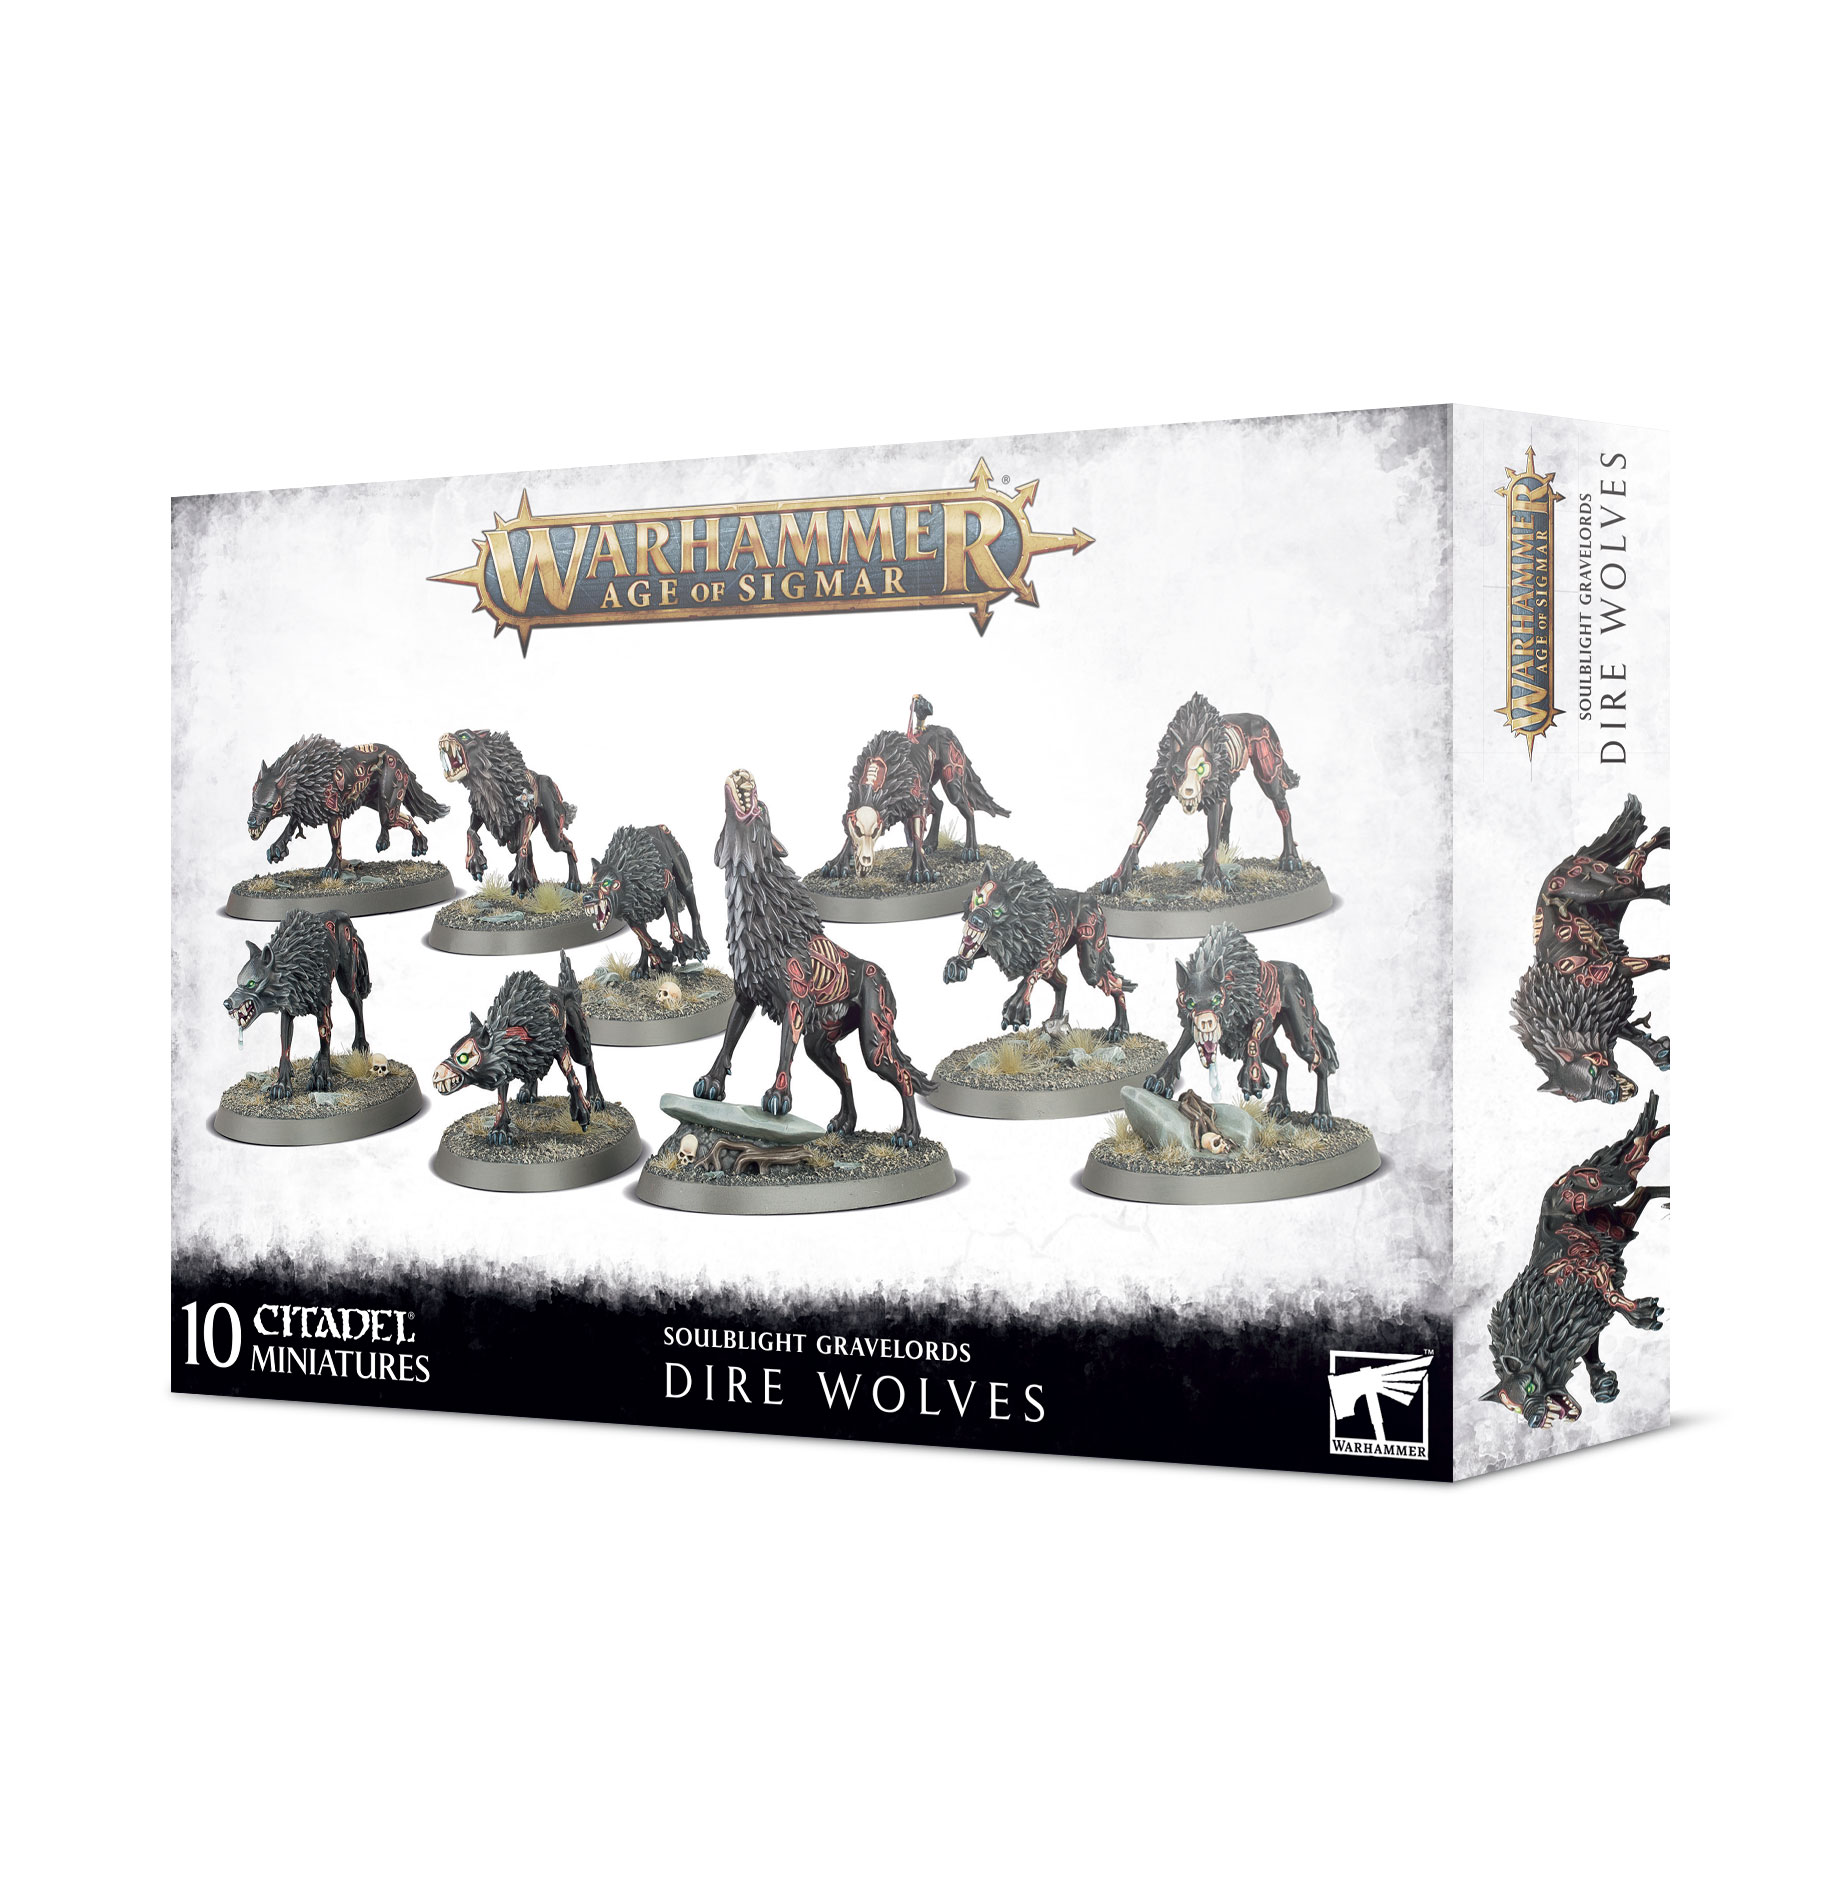 Dire Wolves - 91-45 - Soulblight Gravelords - Warhammer Age of Sigmar